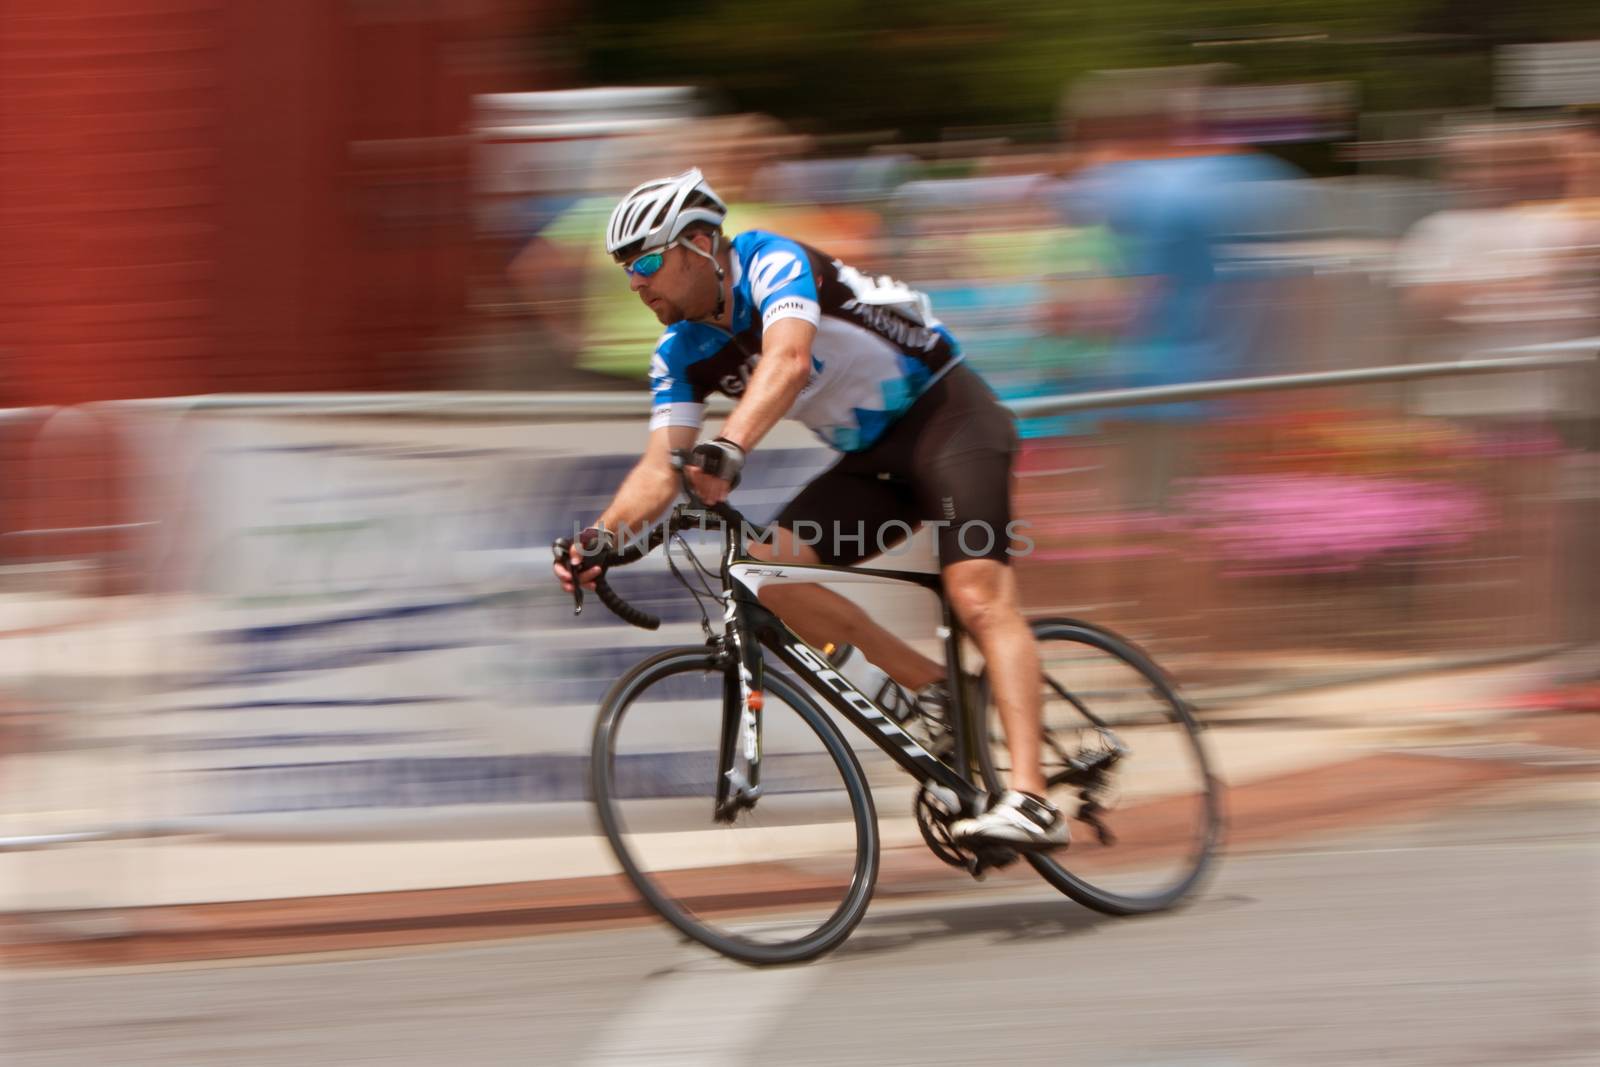 Duluth, GA, USA - August 2, 2014:  Motion blur pan of an amateur cyclist going into a turn while competing in the Georgia Cup Criterium in downtown Duluth. 